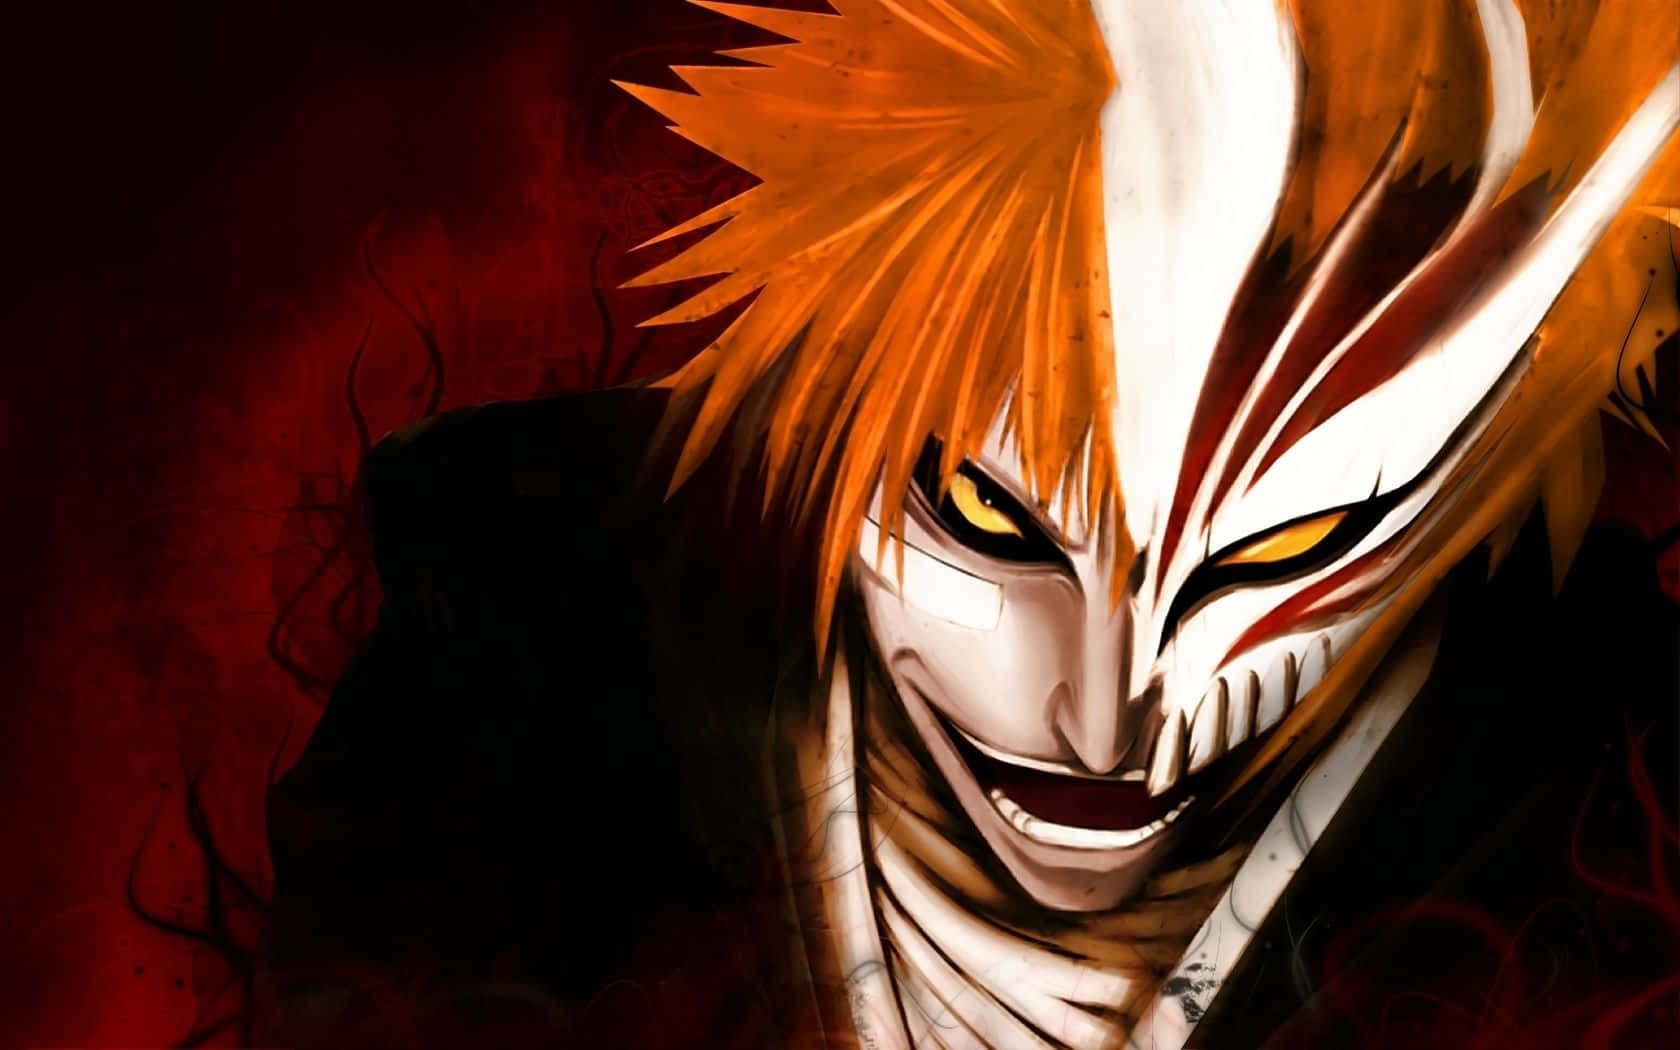 Uniting the Powers Between Good and Evil in ‘Bleach’